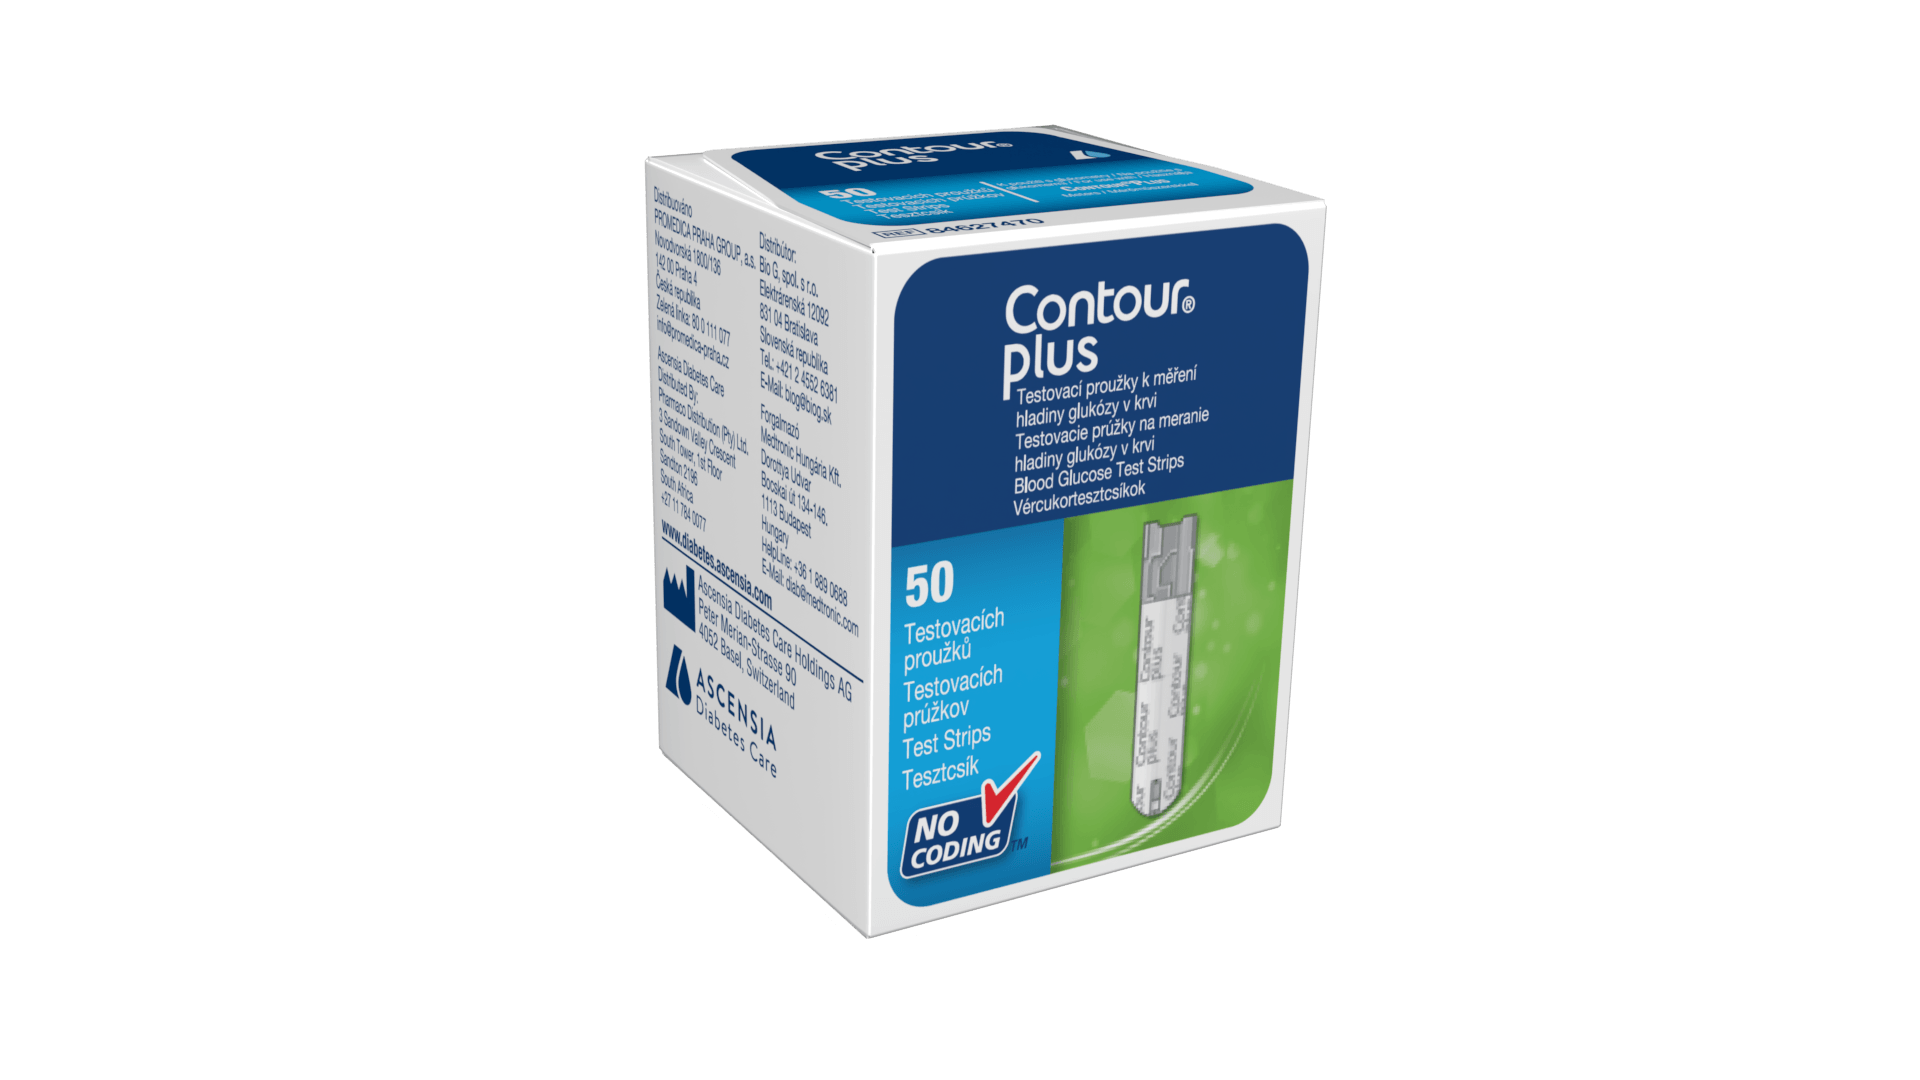 https://pharmaco.co.za/wp-content/uploads/2021/08/Contour-Plus-25-strips.png